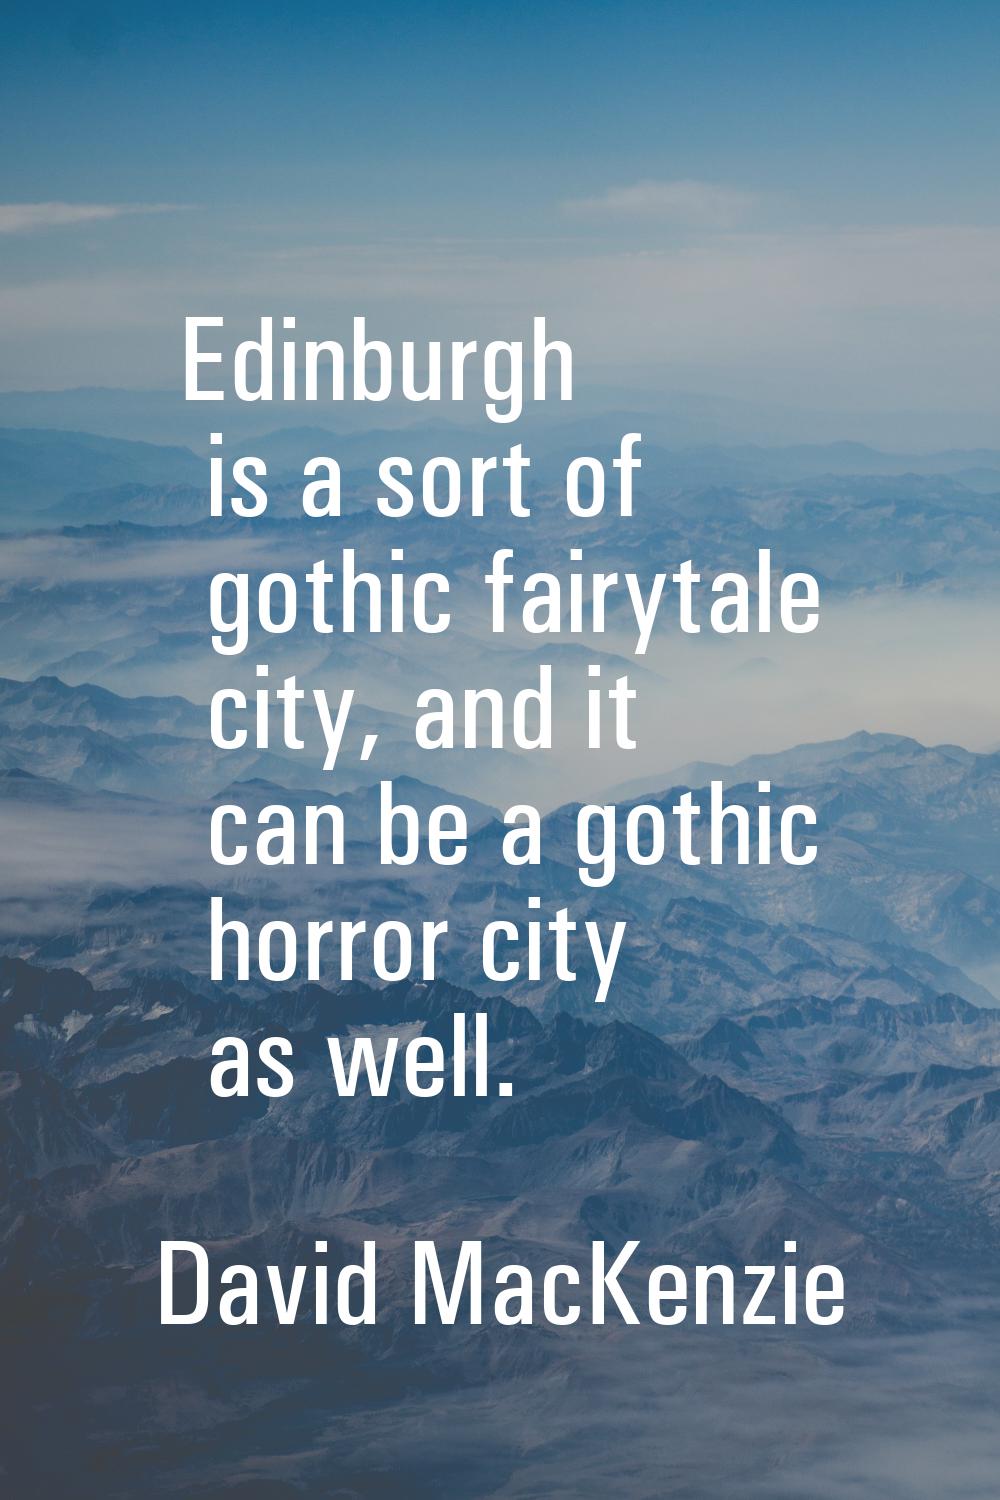 Edinburgh is a sort of gothic fairytale city, and it can be a gothic horror city as well.